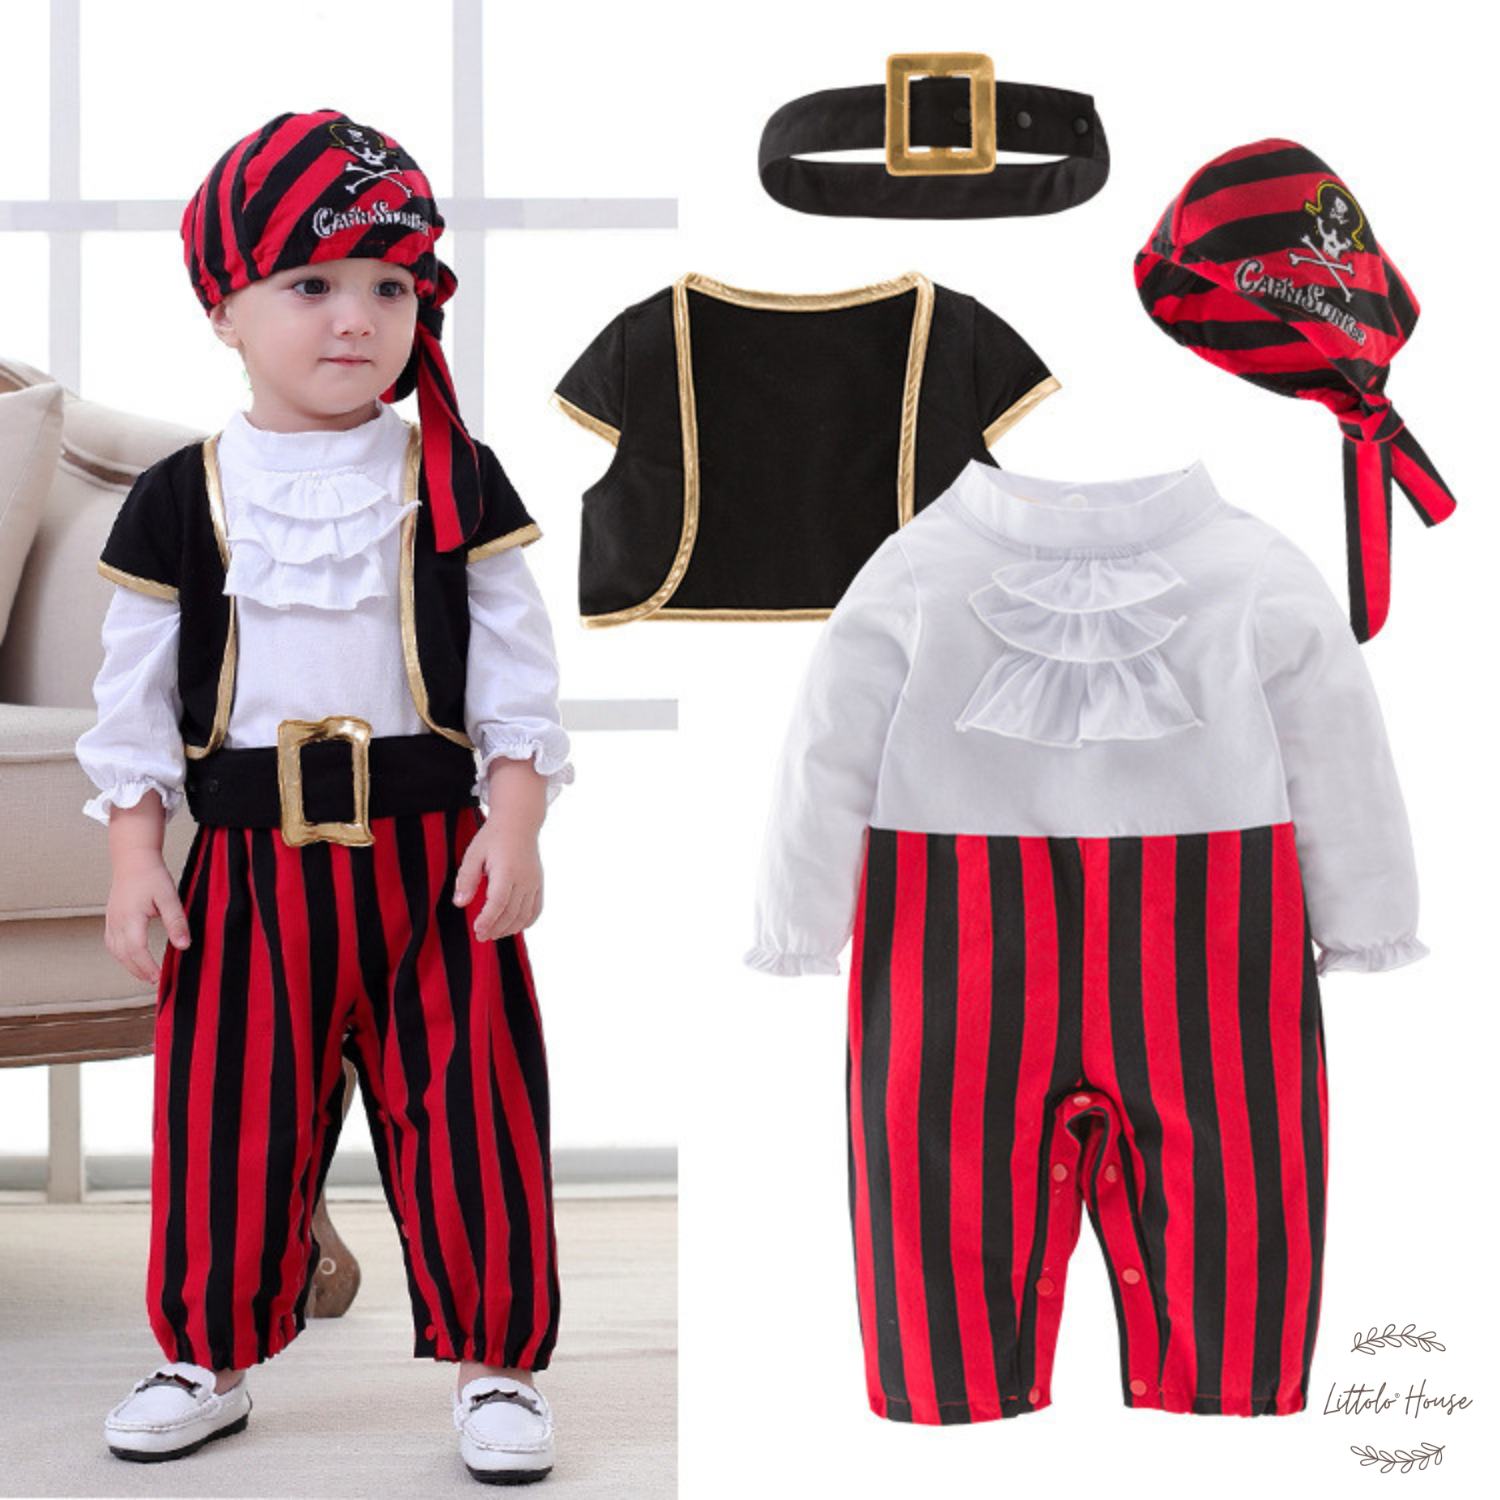 NWT Pint Size Pirate 2 Pc Costume Baby Infant Boys 12-18 Months